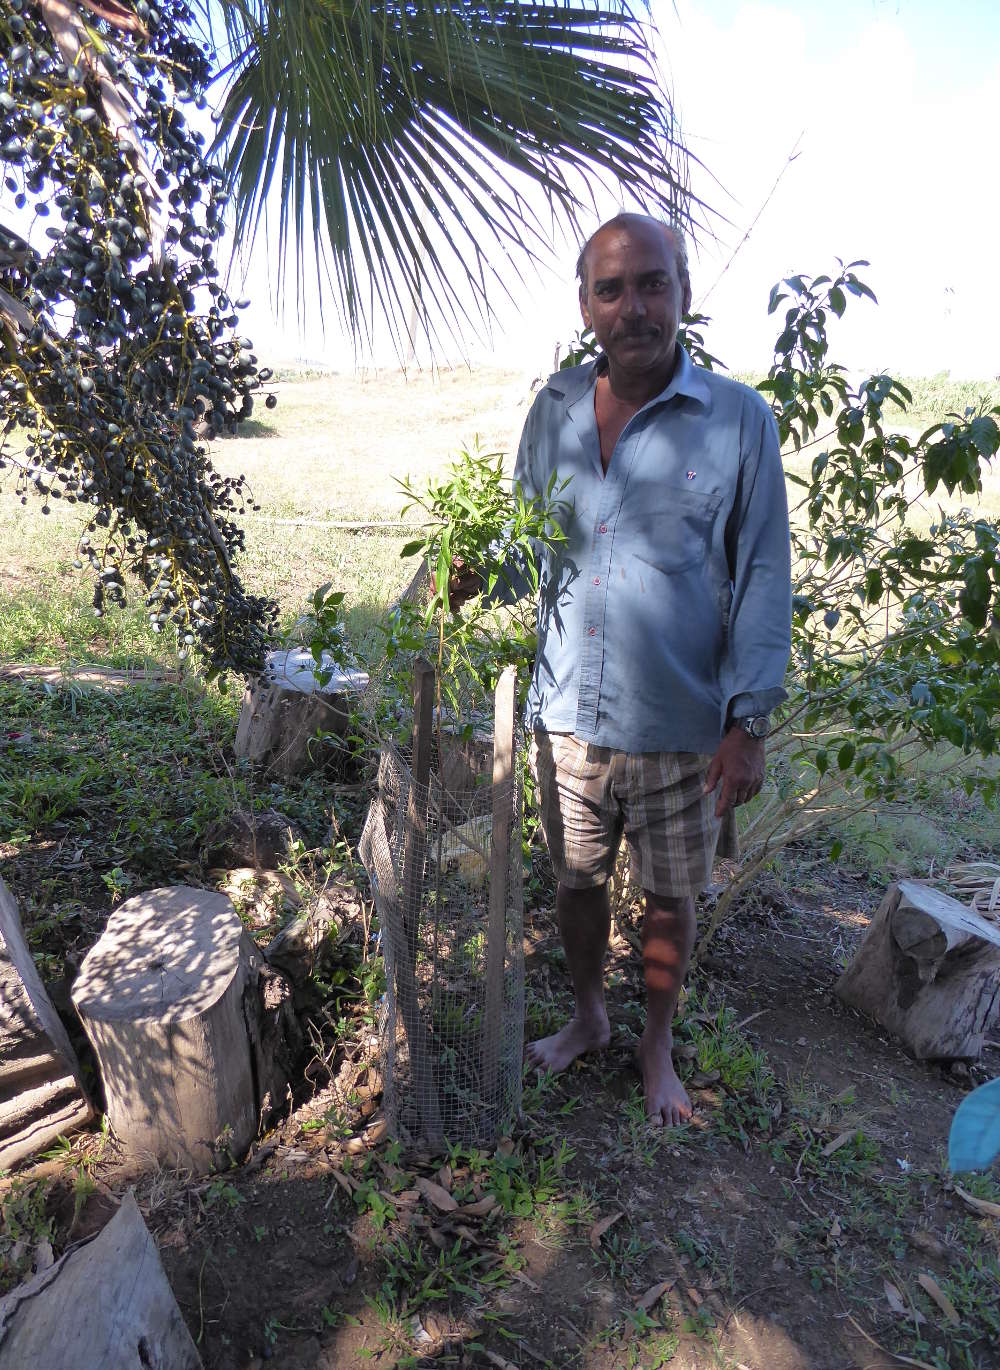 Prakash Chand proudly showing one of his exceptionally tall Yasi (sandalwood) saplings